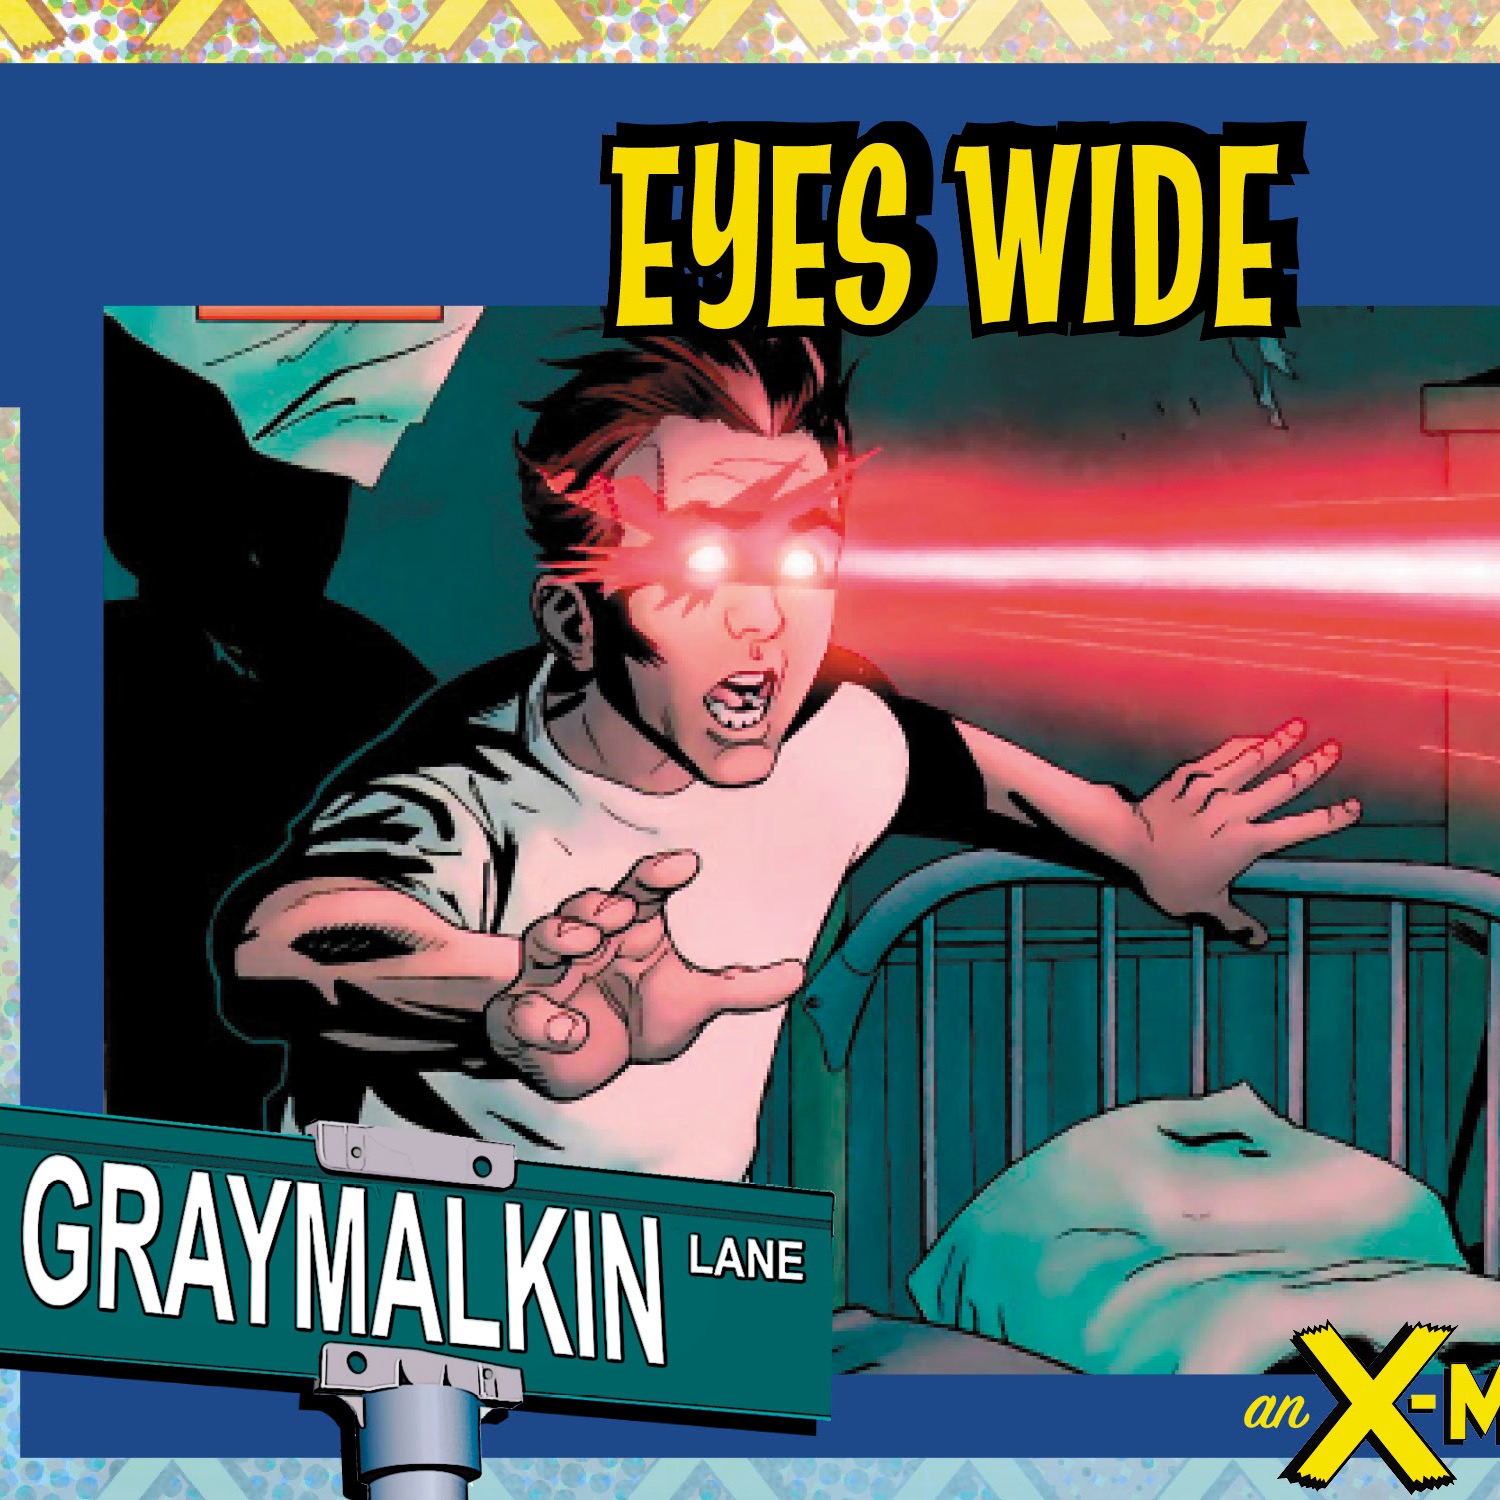 X-Men Origins: Cyclops #1: Eyes Wide... featuring Bob Hall! With Ben Rathbone and Jamie Fay!